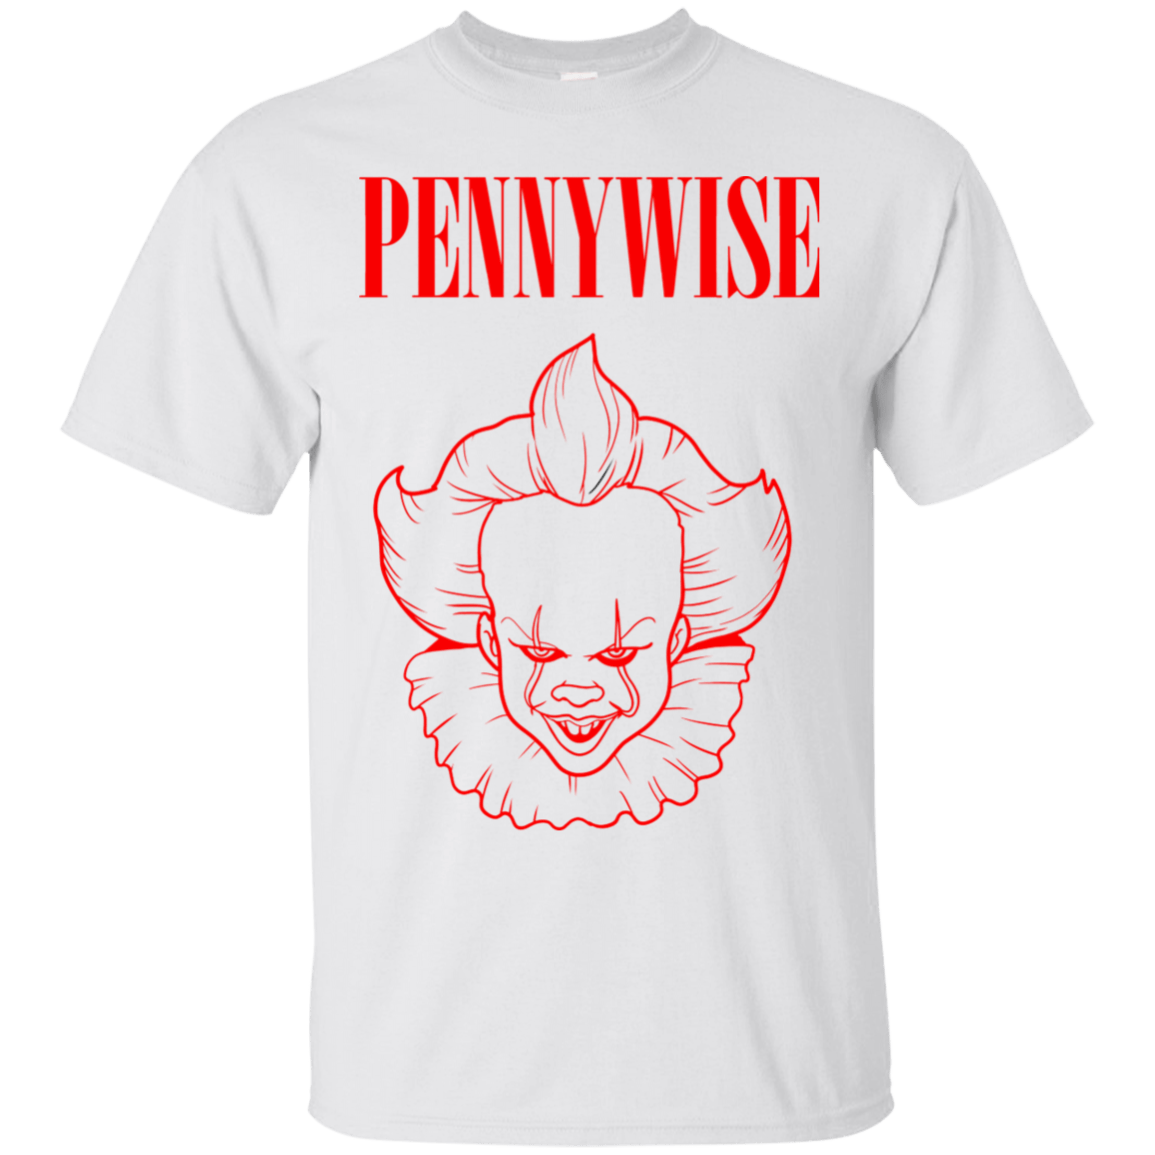 T-Shirts White / S Pennywise T-Shirt